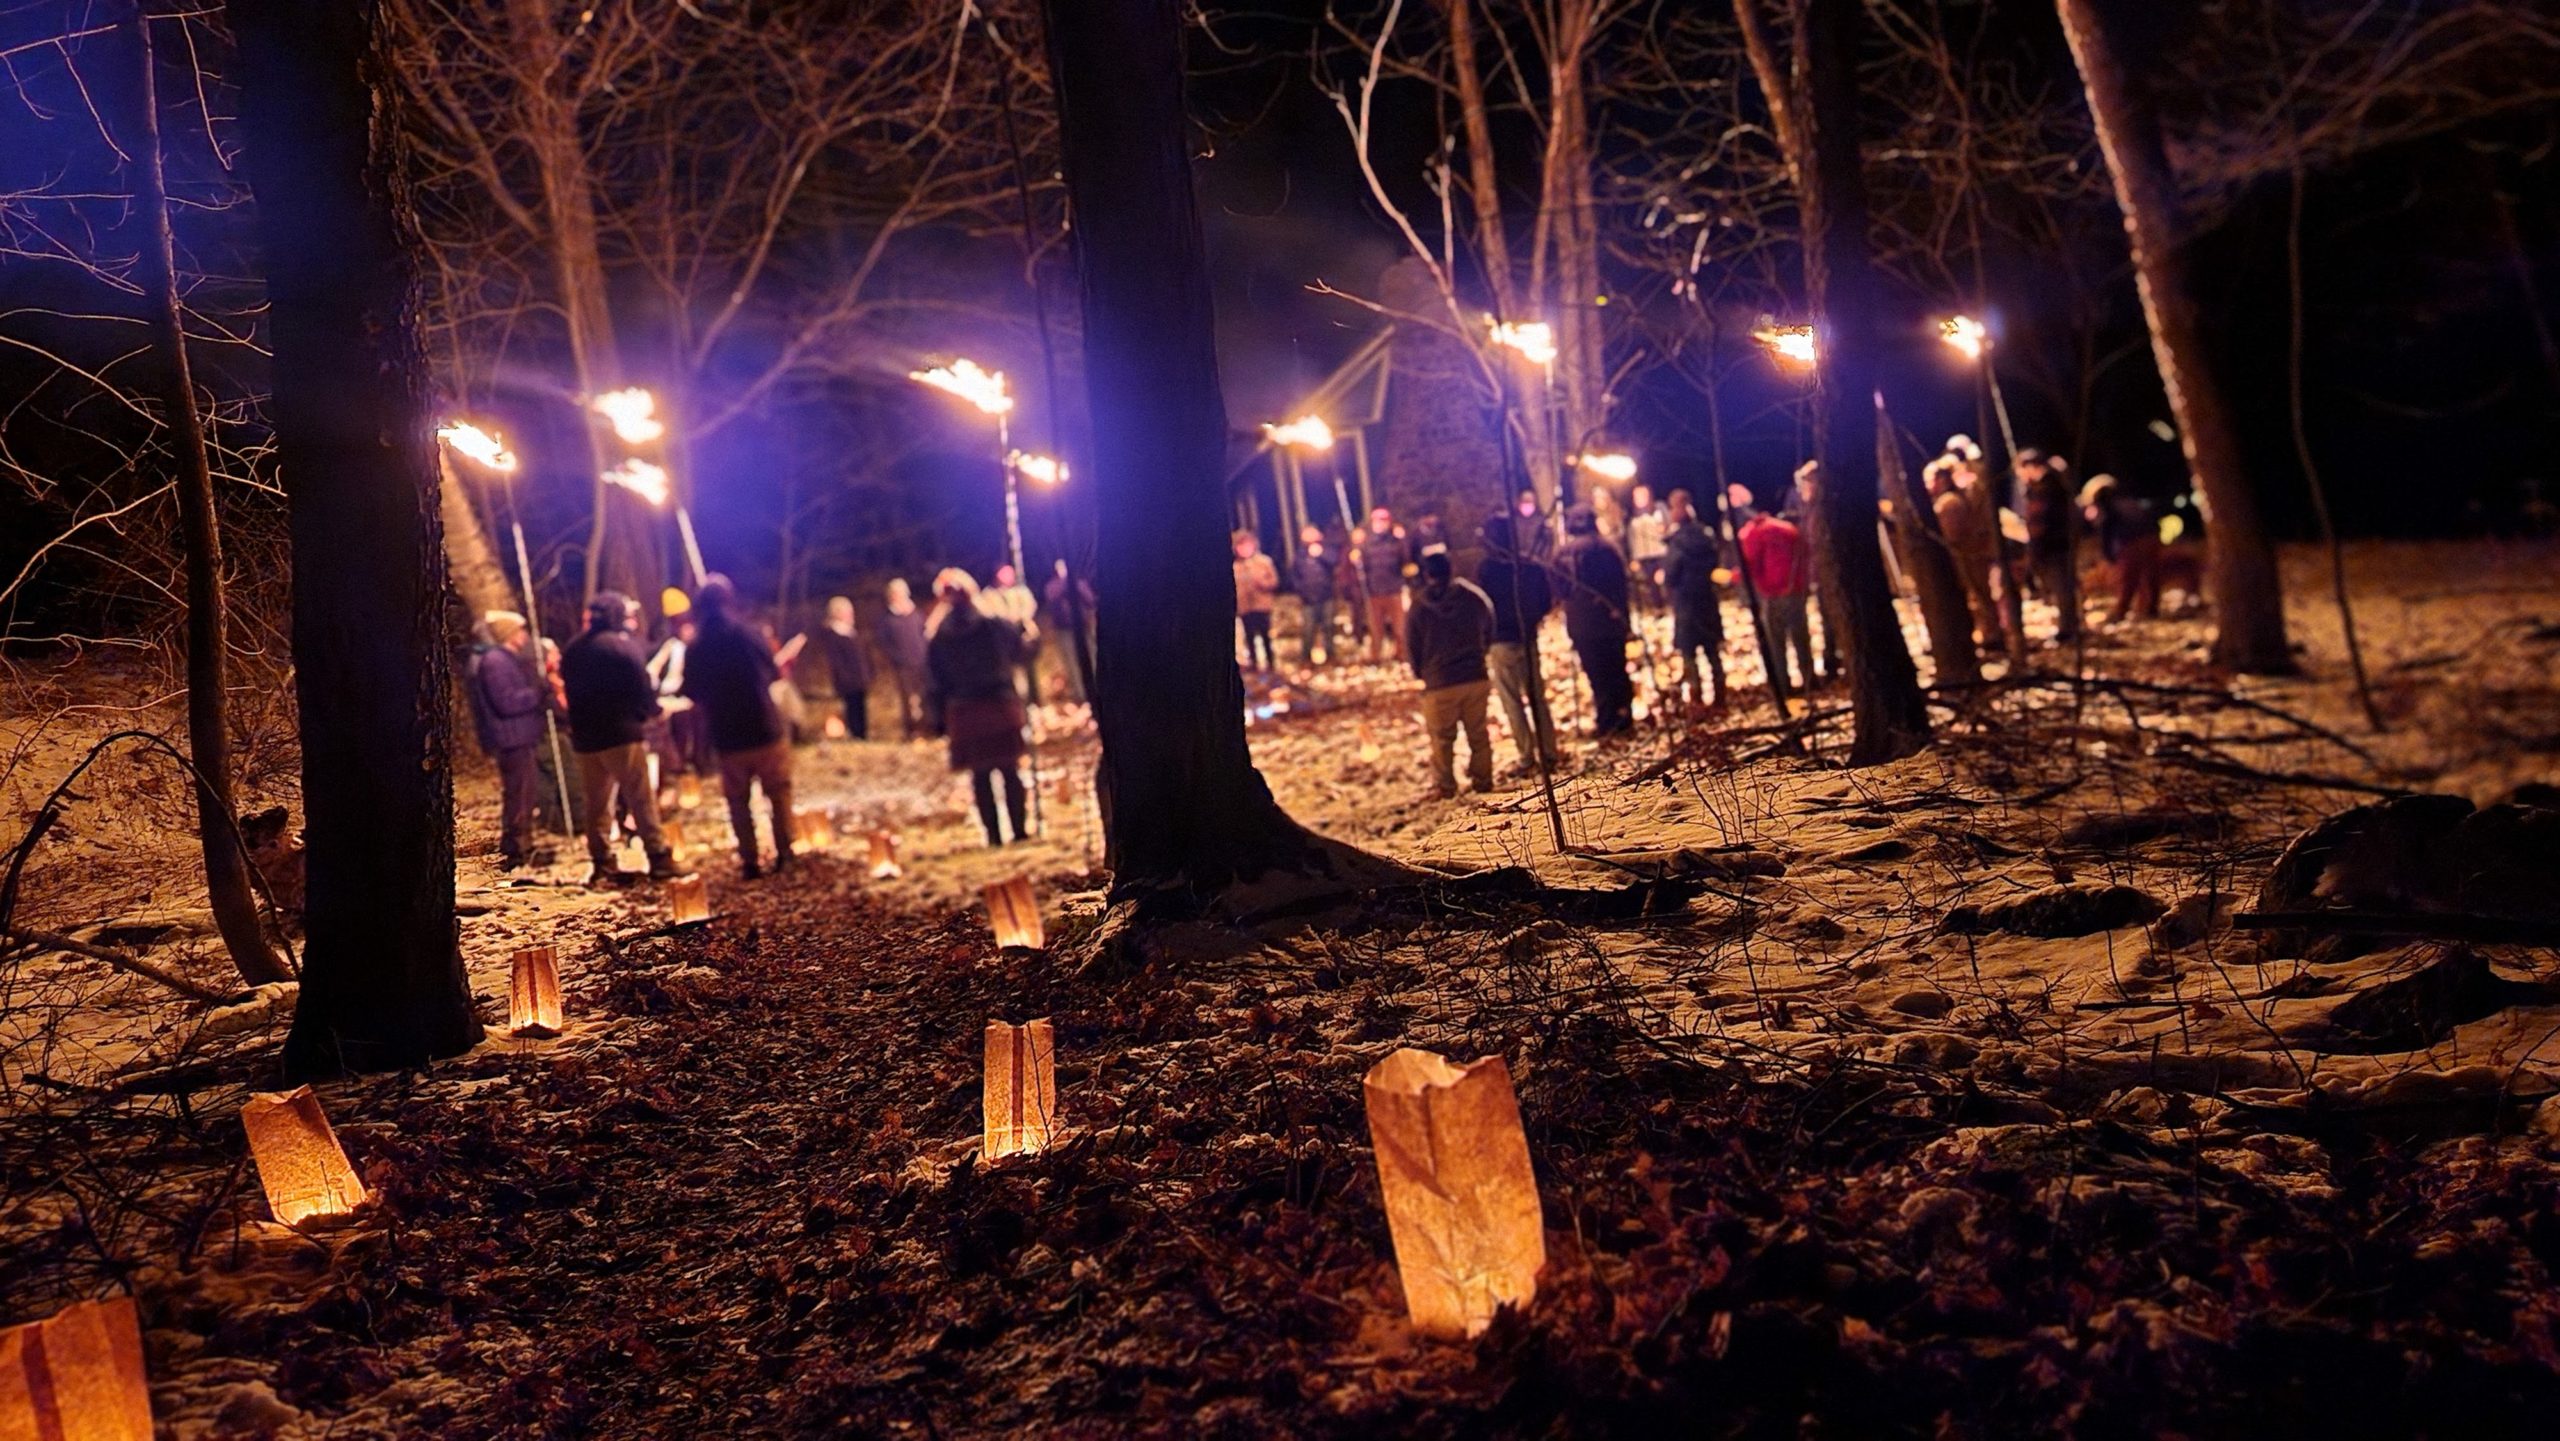 People with torches gather in the dark woods to sing songs and celebrate Yule